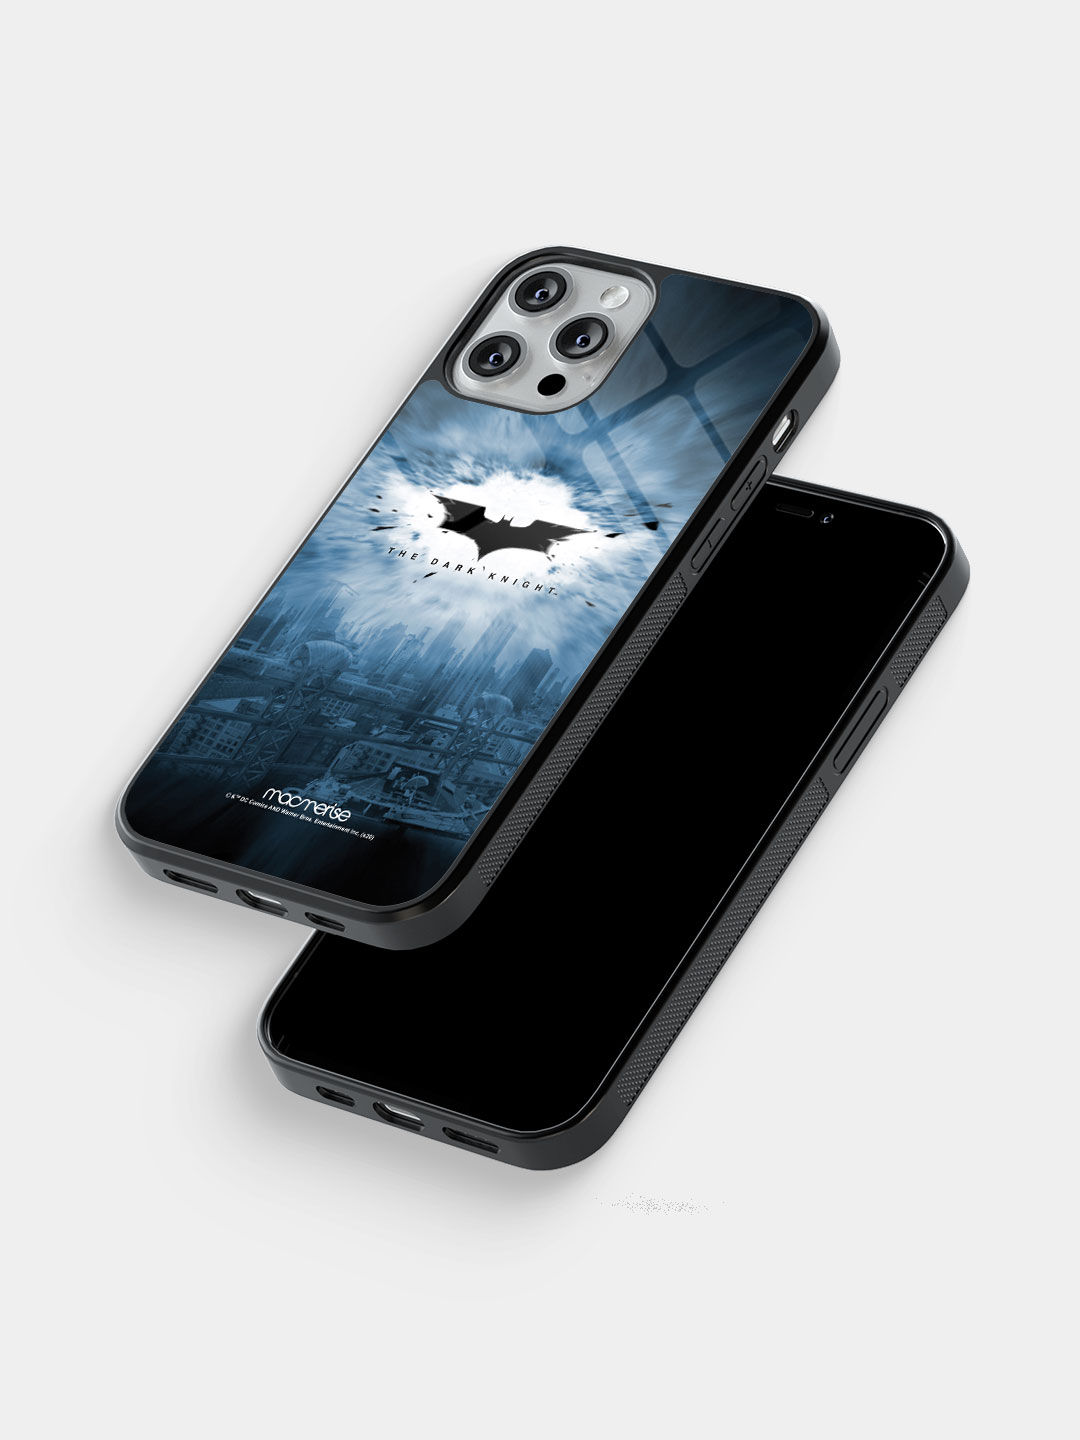 The Dark Knight - Glass Case For iPhone 13 Pro Max